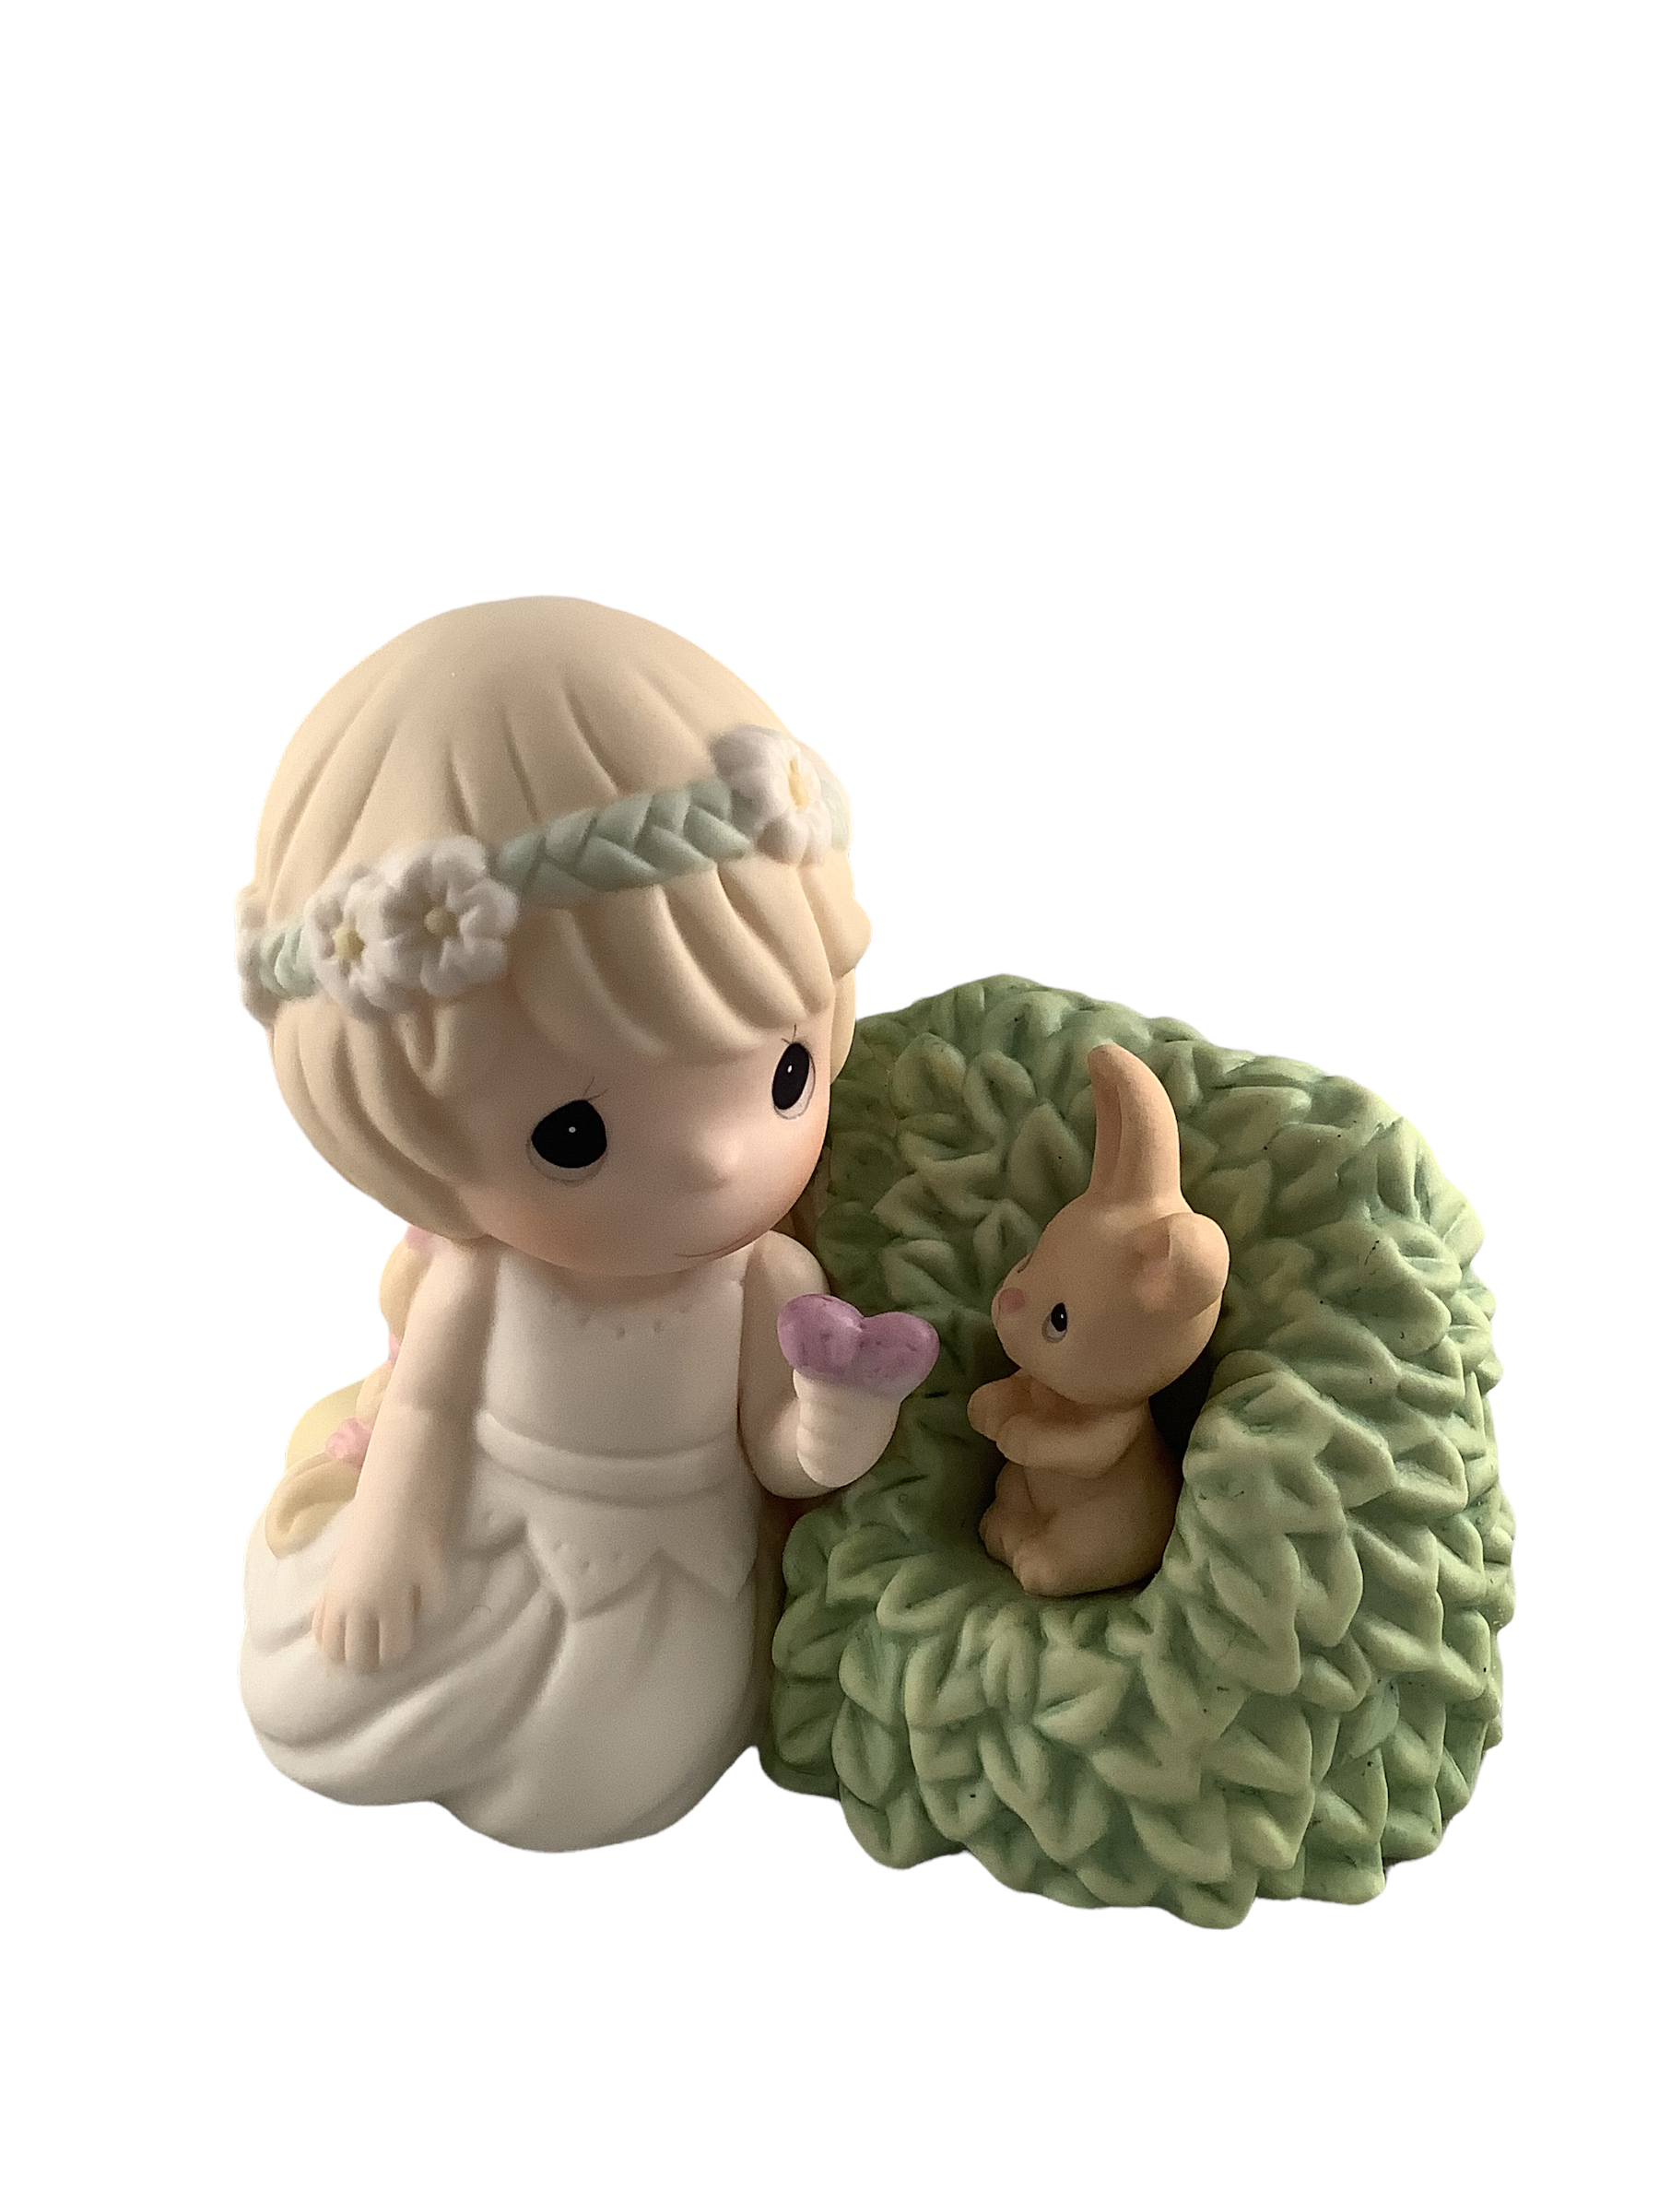 Life's Always Greener With You By My Side - Precious Moment Figurine